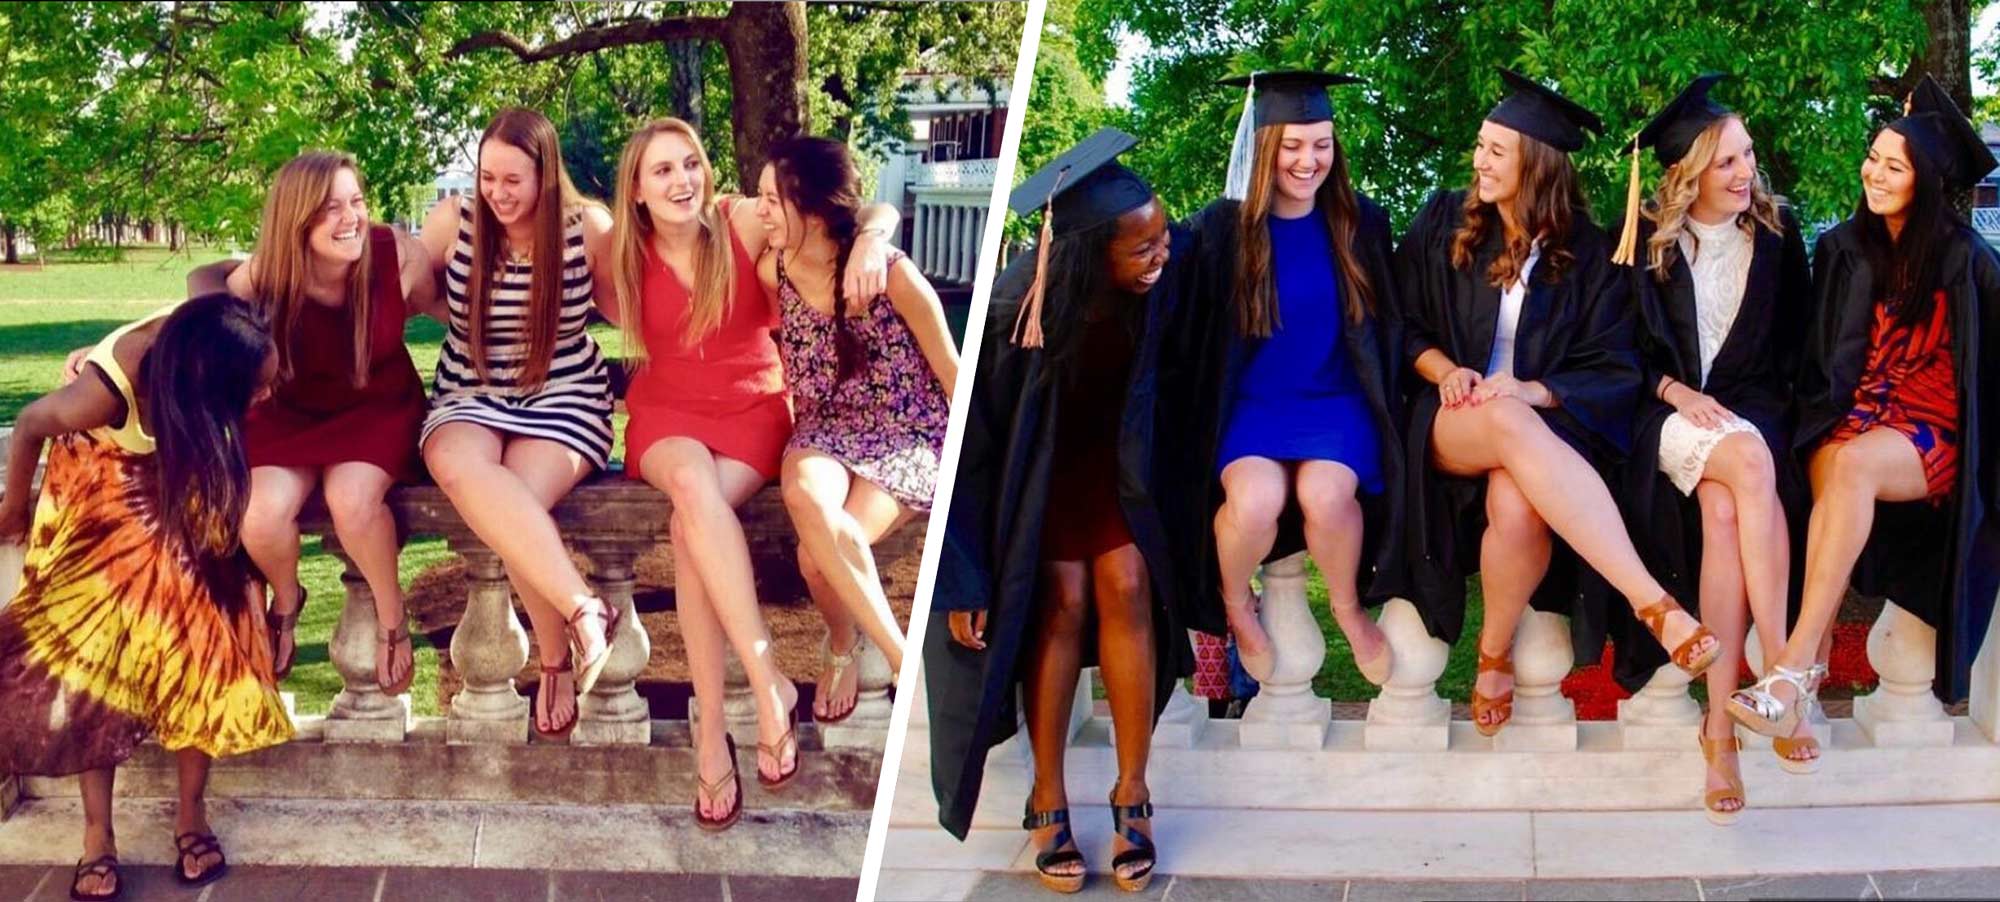 Left: Dupree and her friends as first-year students. Right: Dupree and her friends recreate their first-year picture in their cap and gowns. From left to right: Chanel DuPree, Deanna Madagan, Abby Systma, Kaitlyn Colliton and Jennifer Cifuentes.